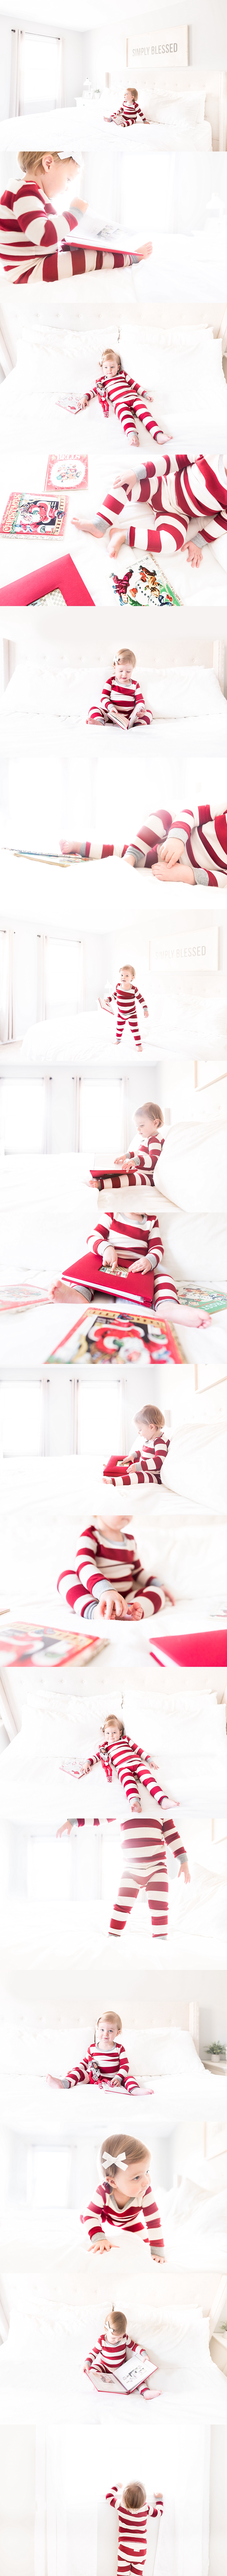 Our Christmas Card Memory Book | Bethadilly Photography